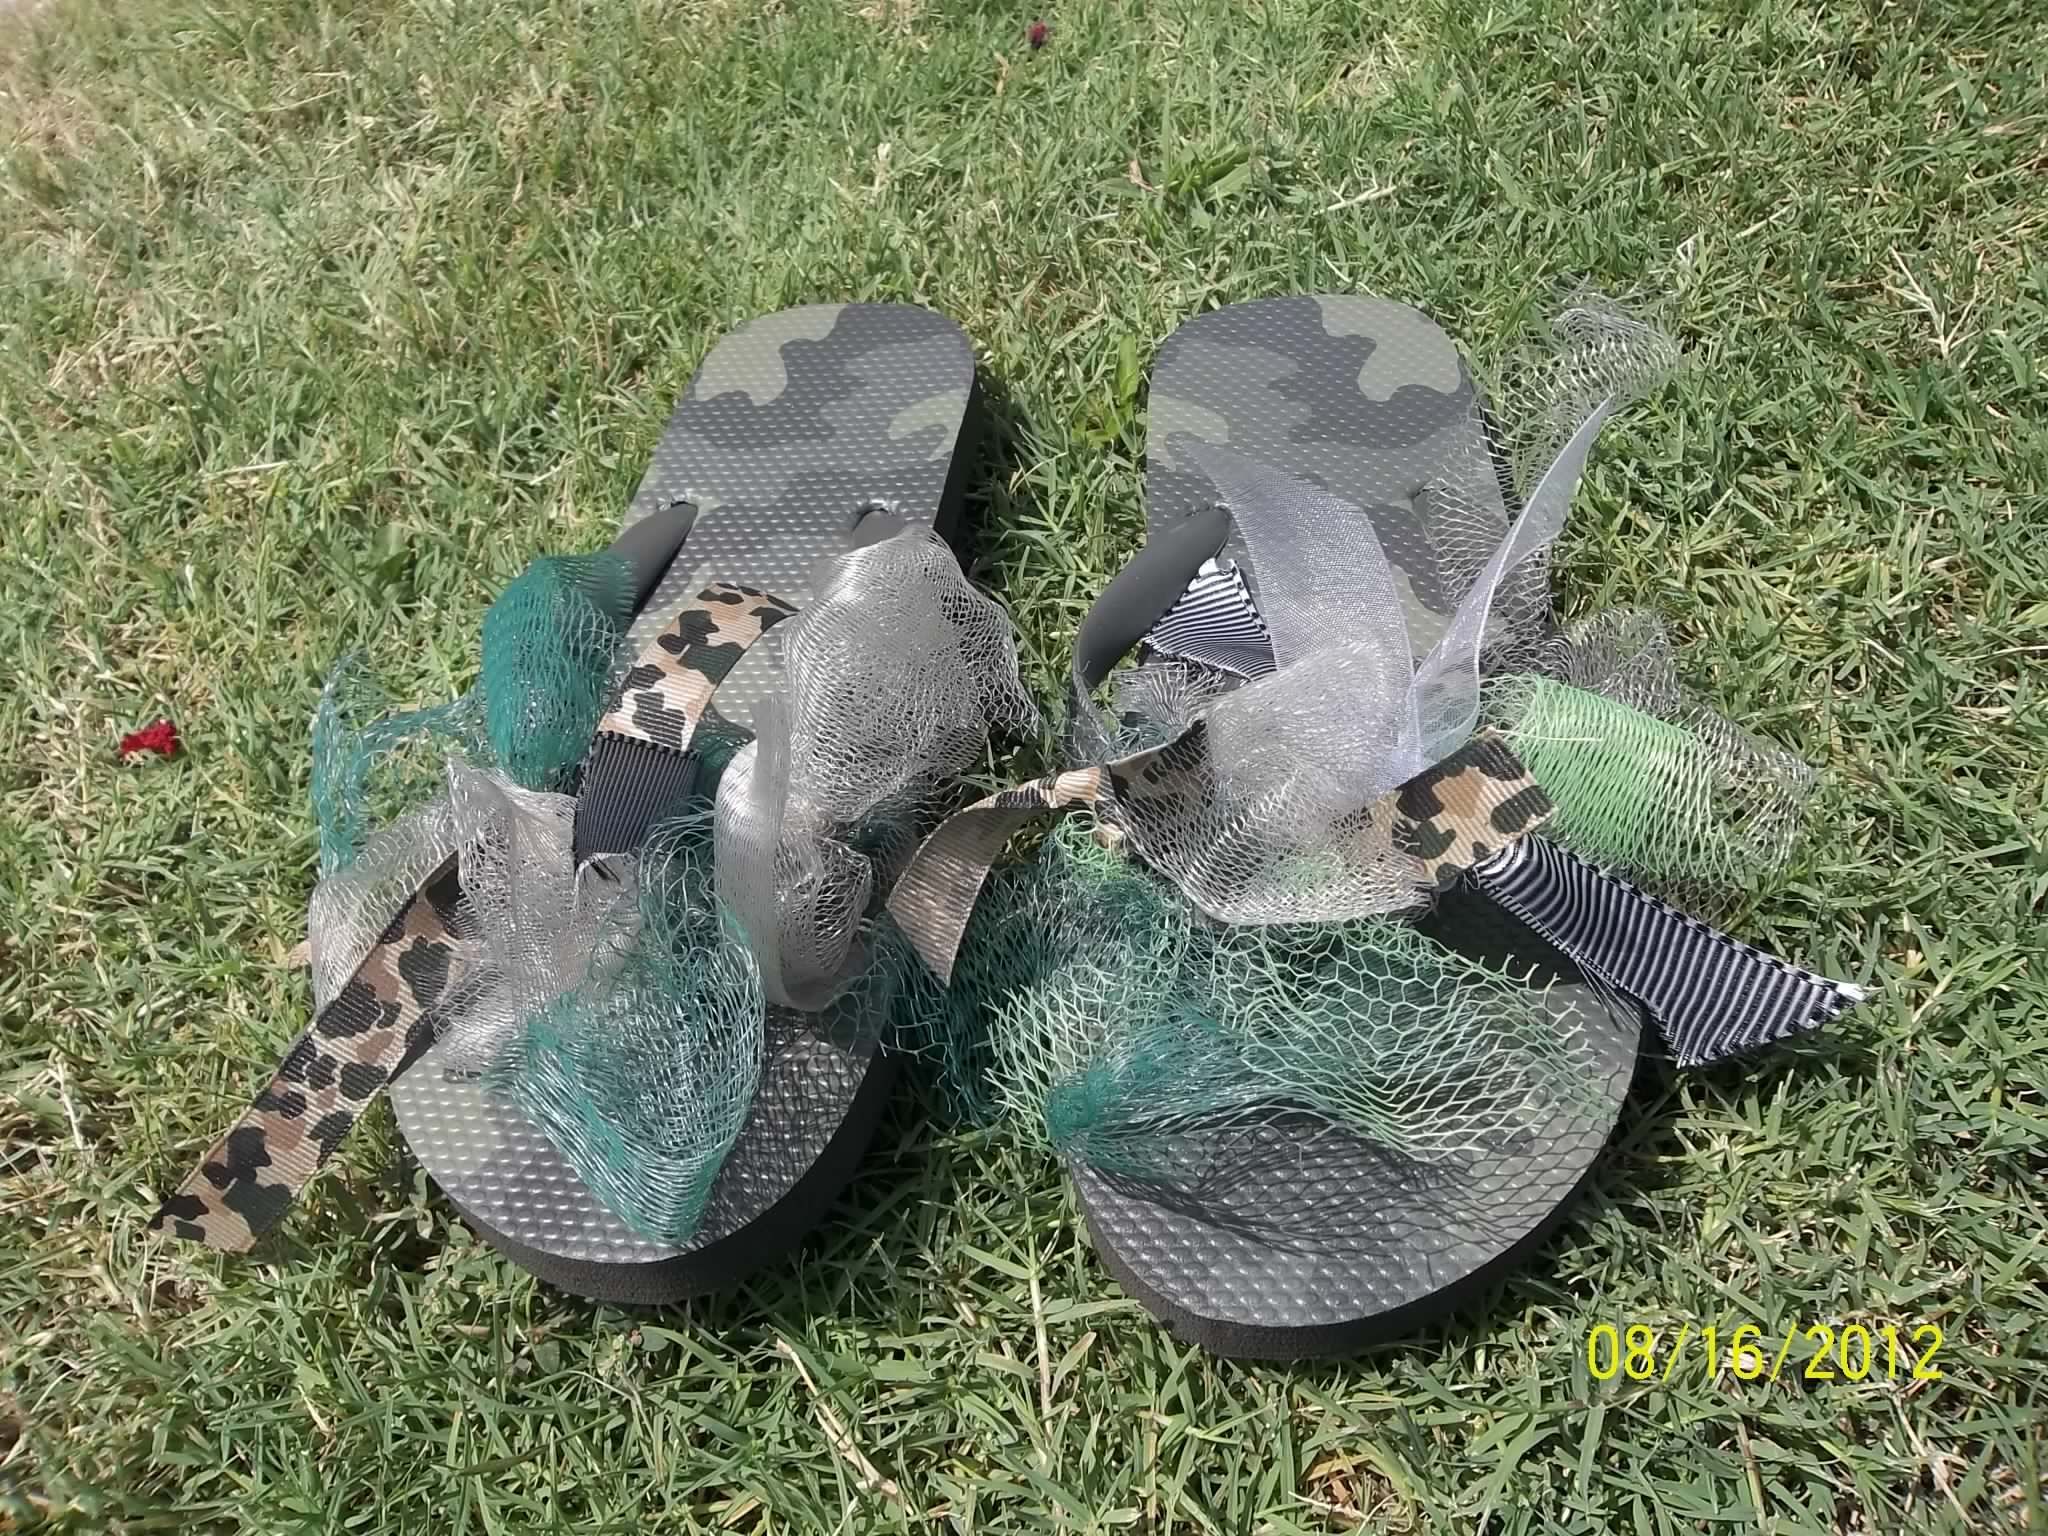 Army Cam0Uflage Camouflage Flops With Dark Green And Mocha Intended For Dark Mocha Ribbon Chandeliers (View 10 of 15)